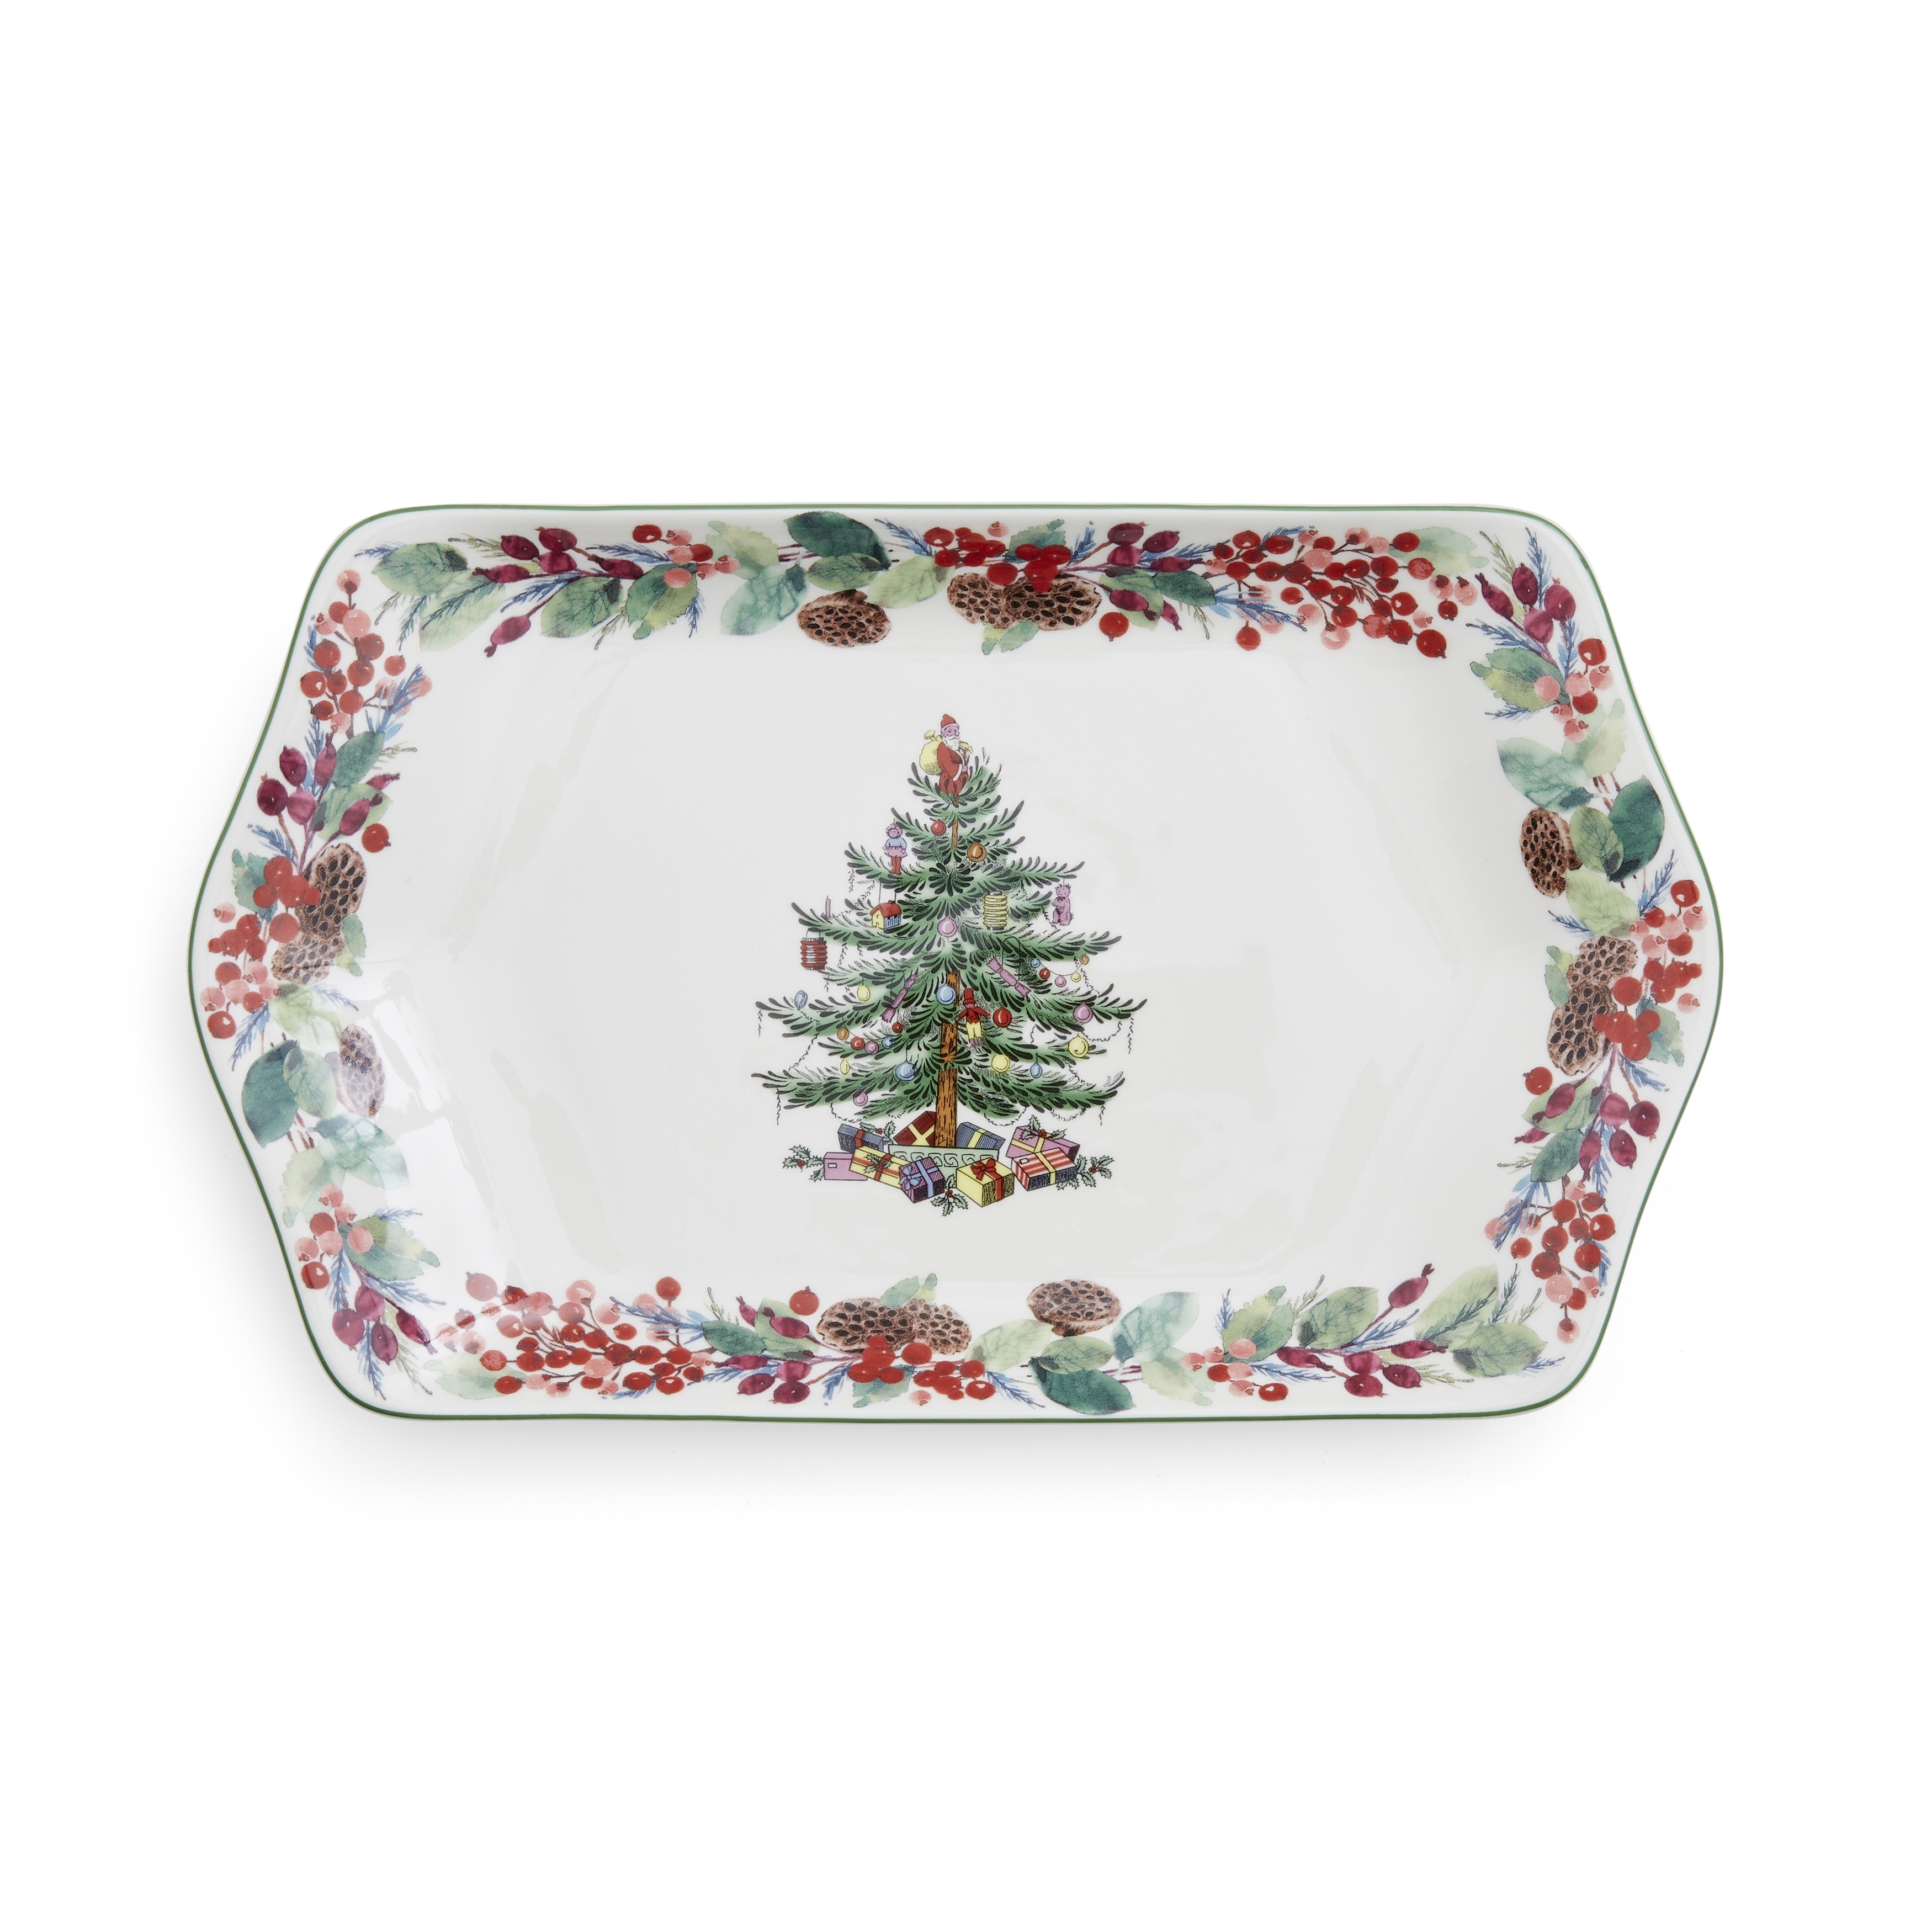 https://ak1.ostkcdn.com/images/products/is/images/direct/b2210cd6bc76501fe96135859594c3ea9aabfdb2/Spode-Christmas-Tree-2023-Annual-Dessert-Tray.jpg